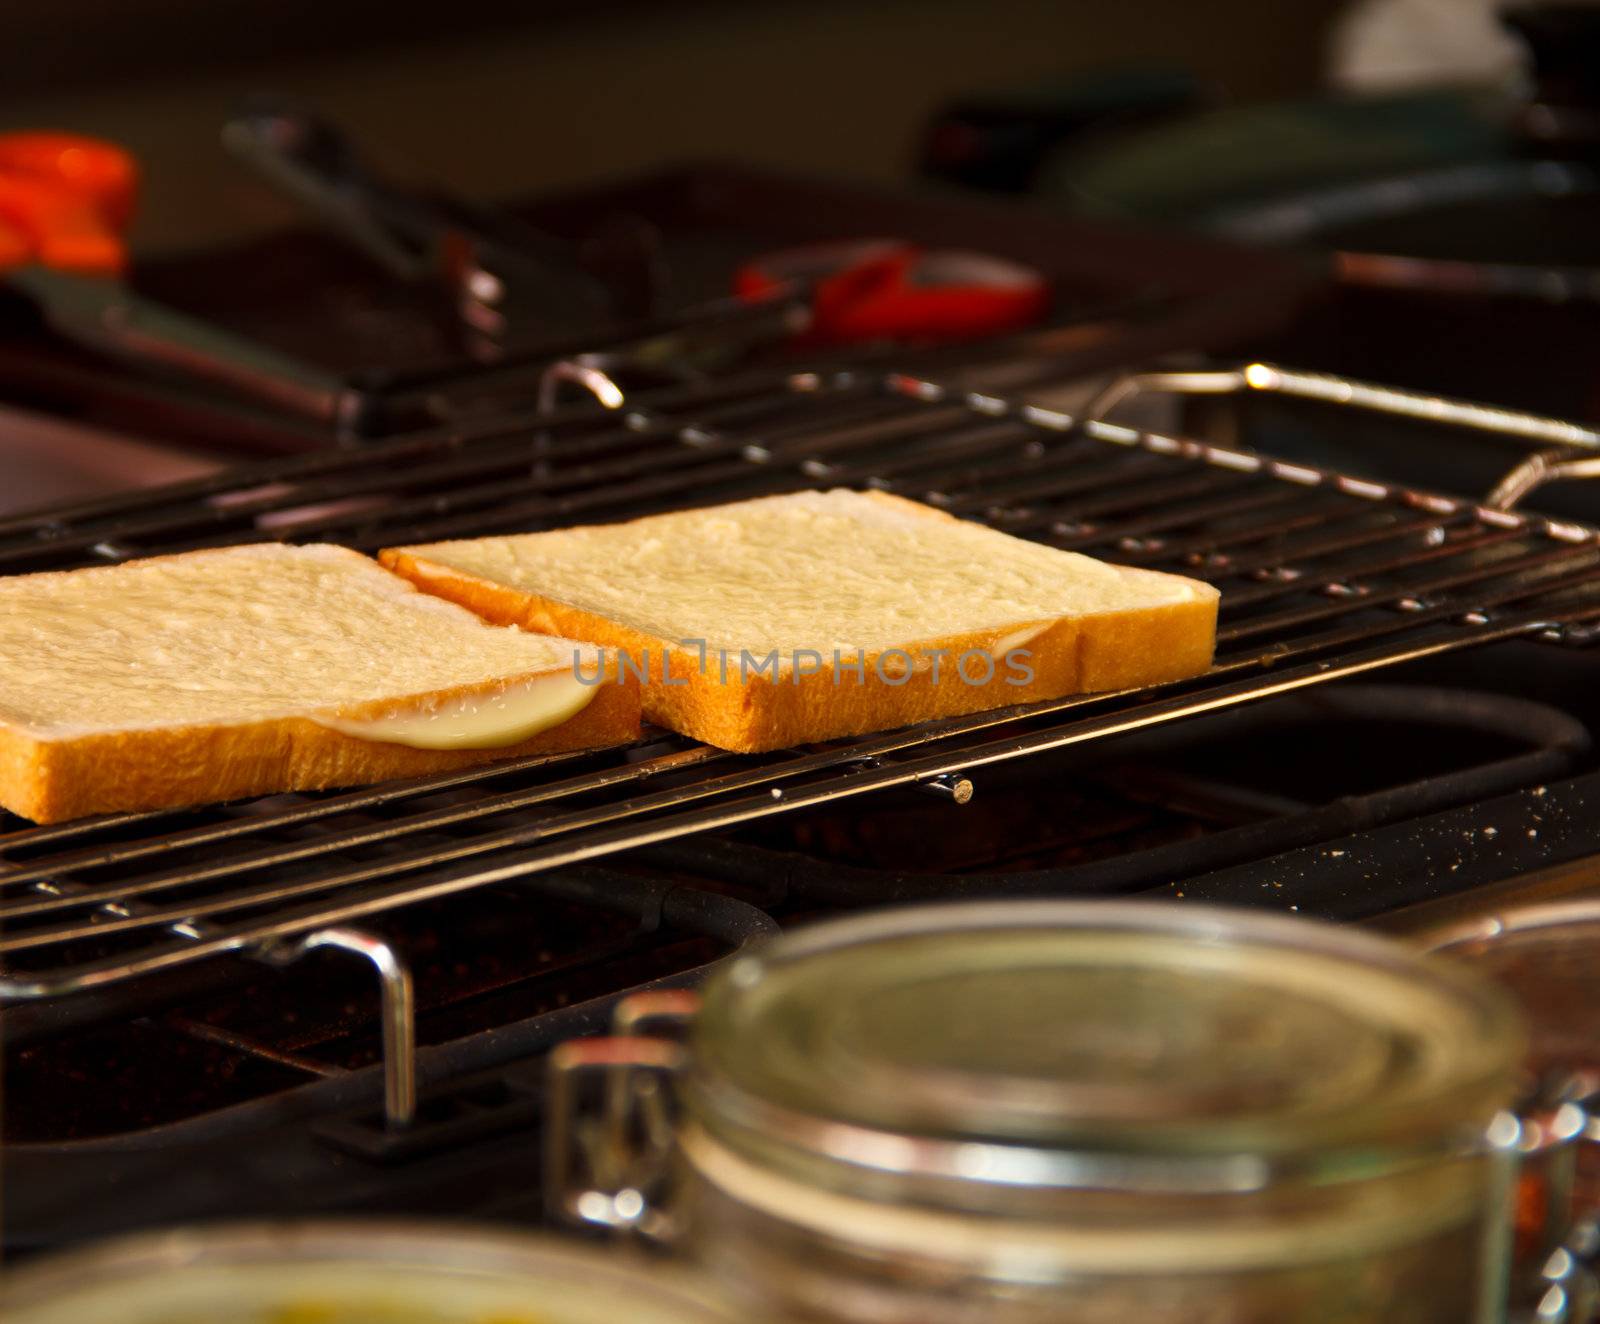 Sliced Sandwich bread on the electric grill